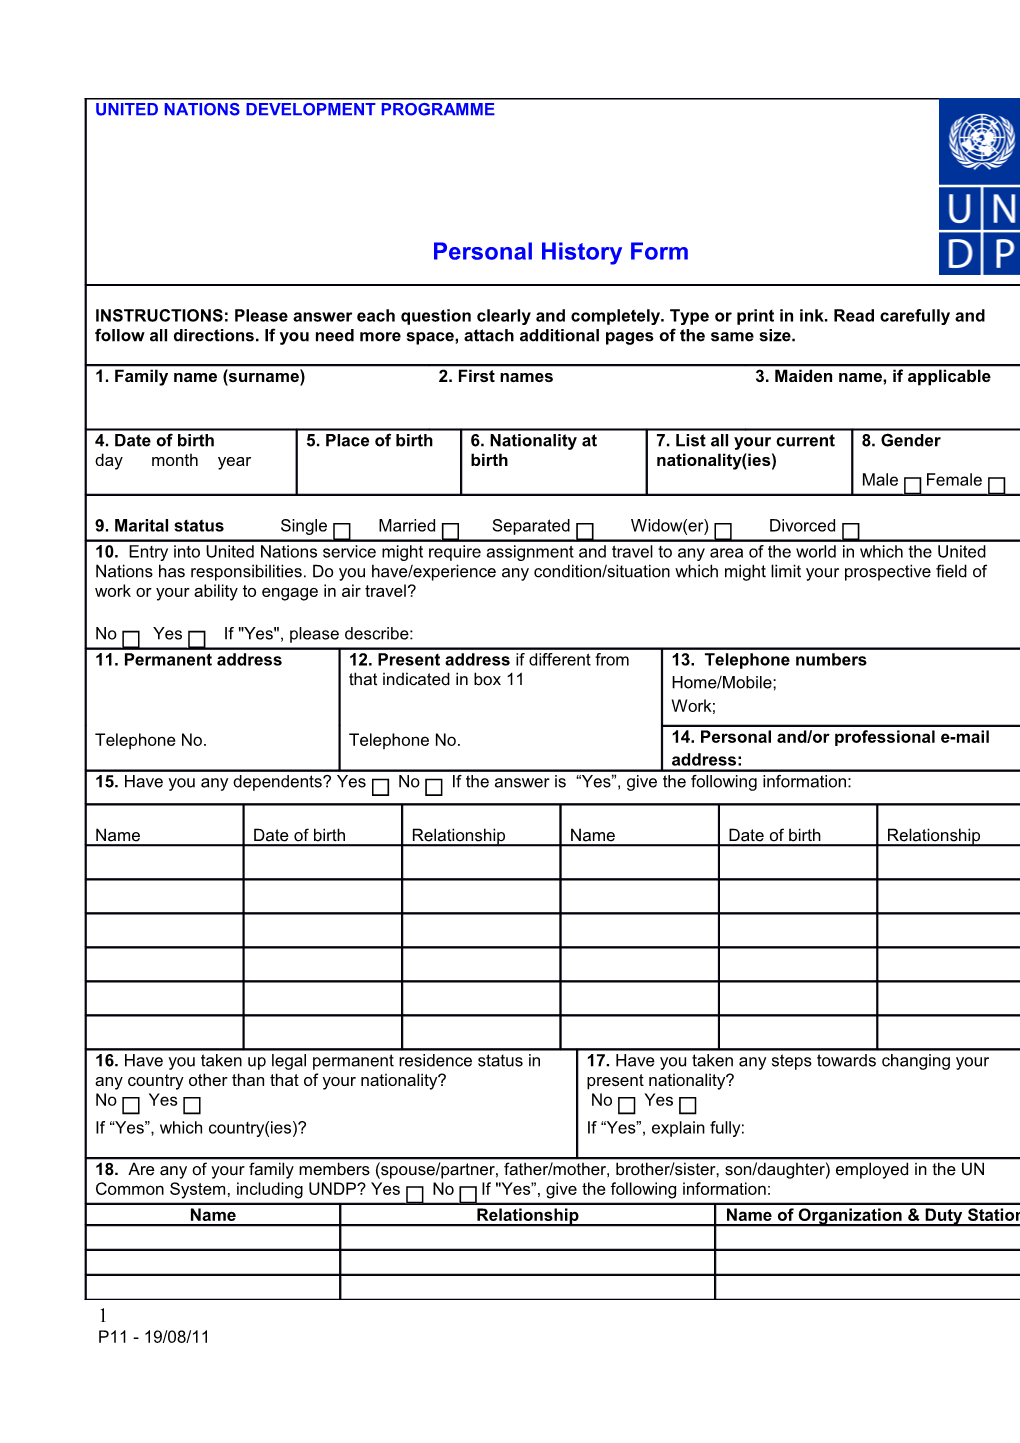 UNITED NATIONS DEVELOPMENT PROGRAMME Personal History Form